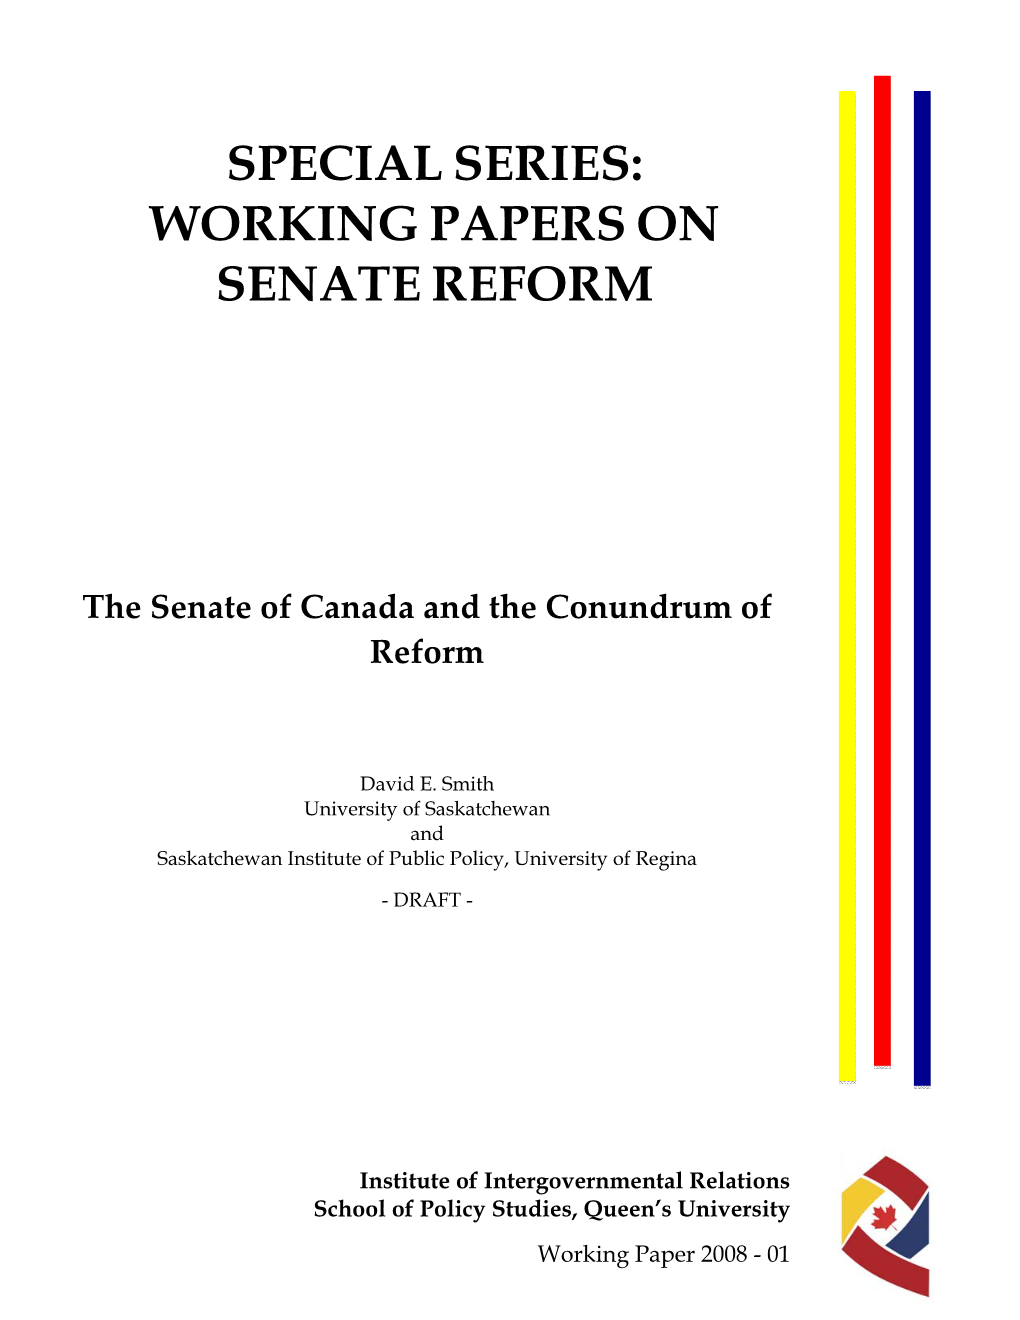 Working Papers on Senate Reform